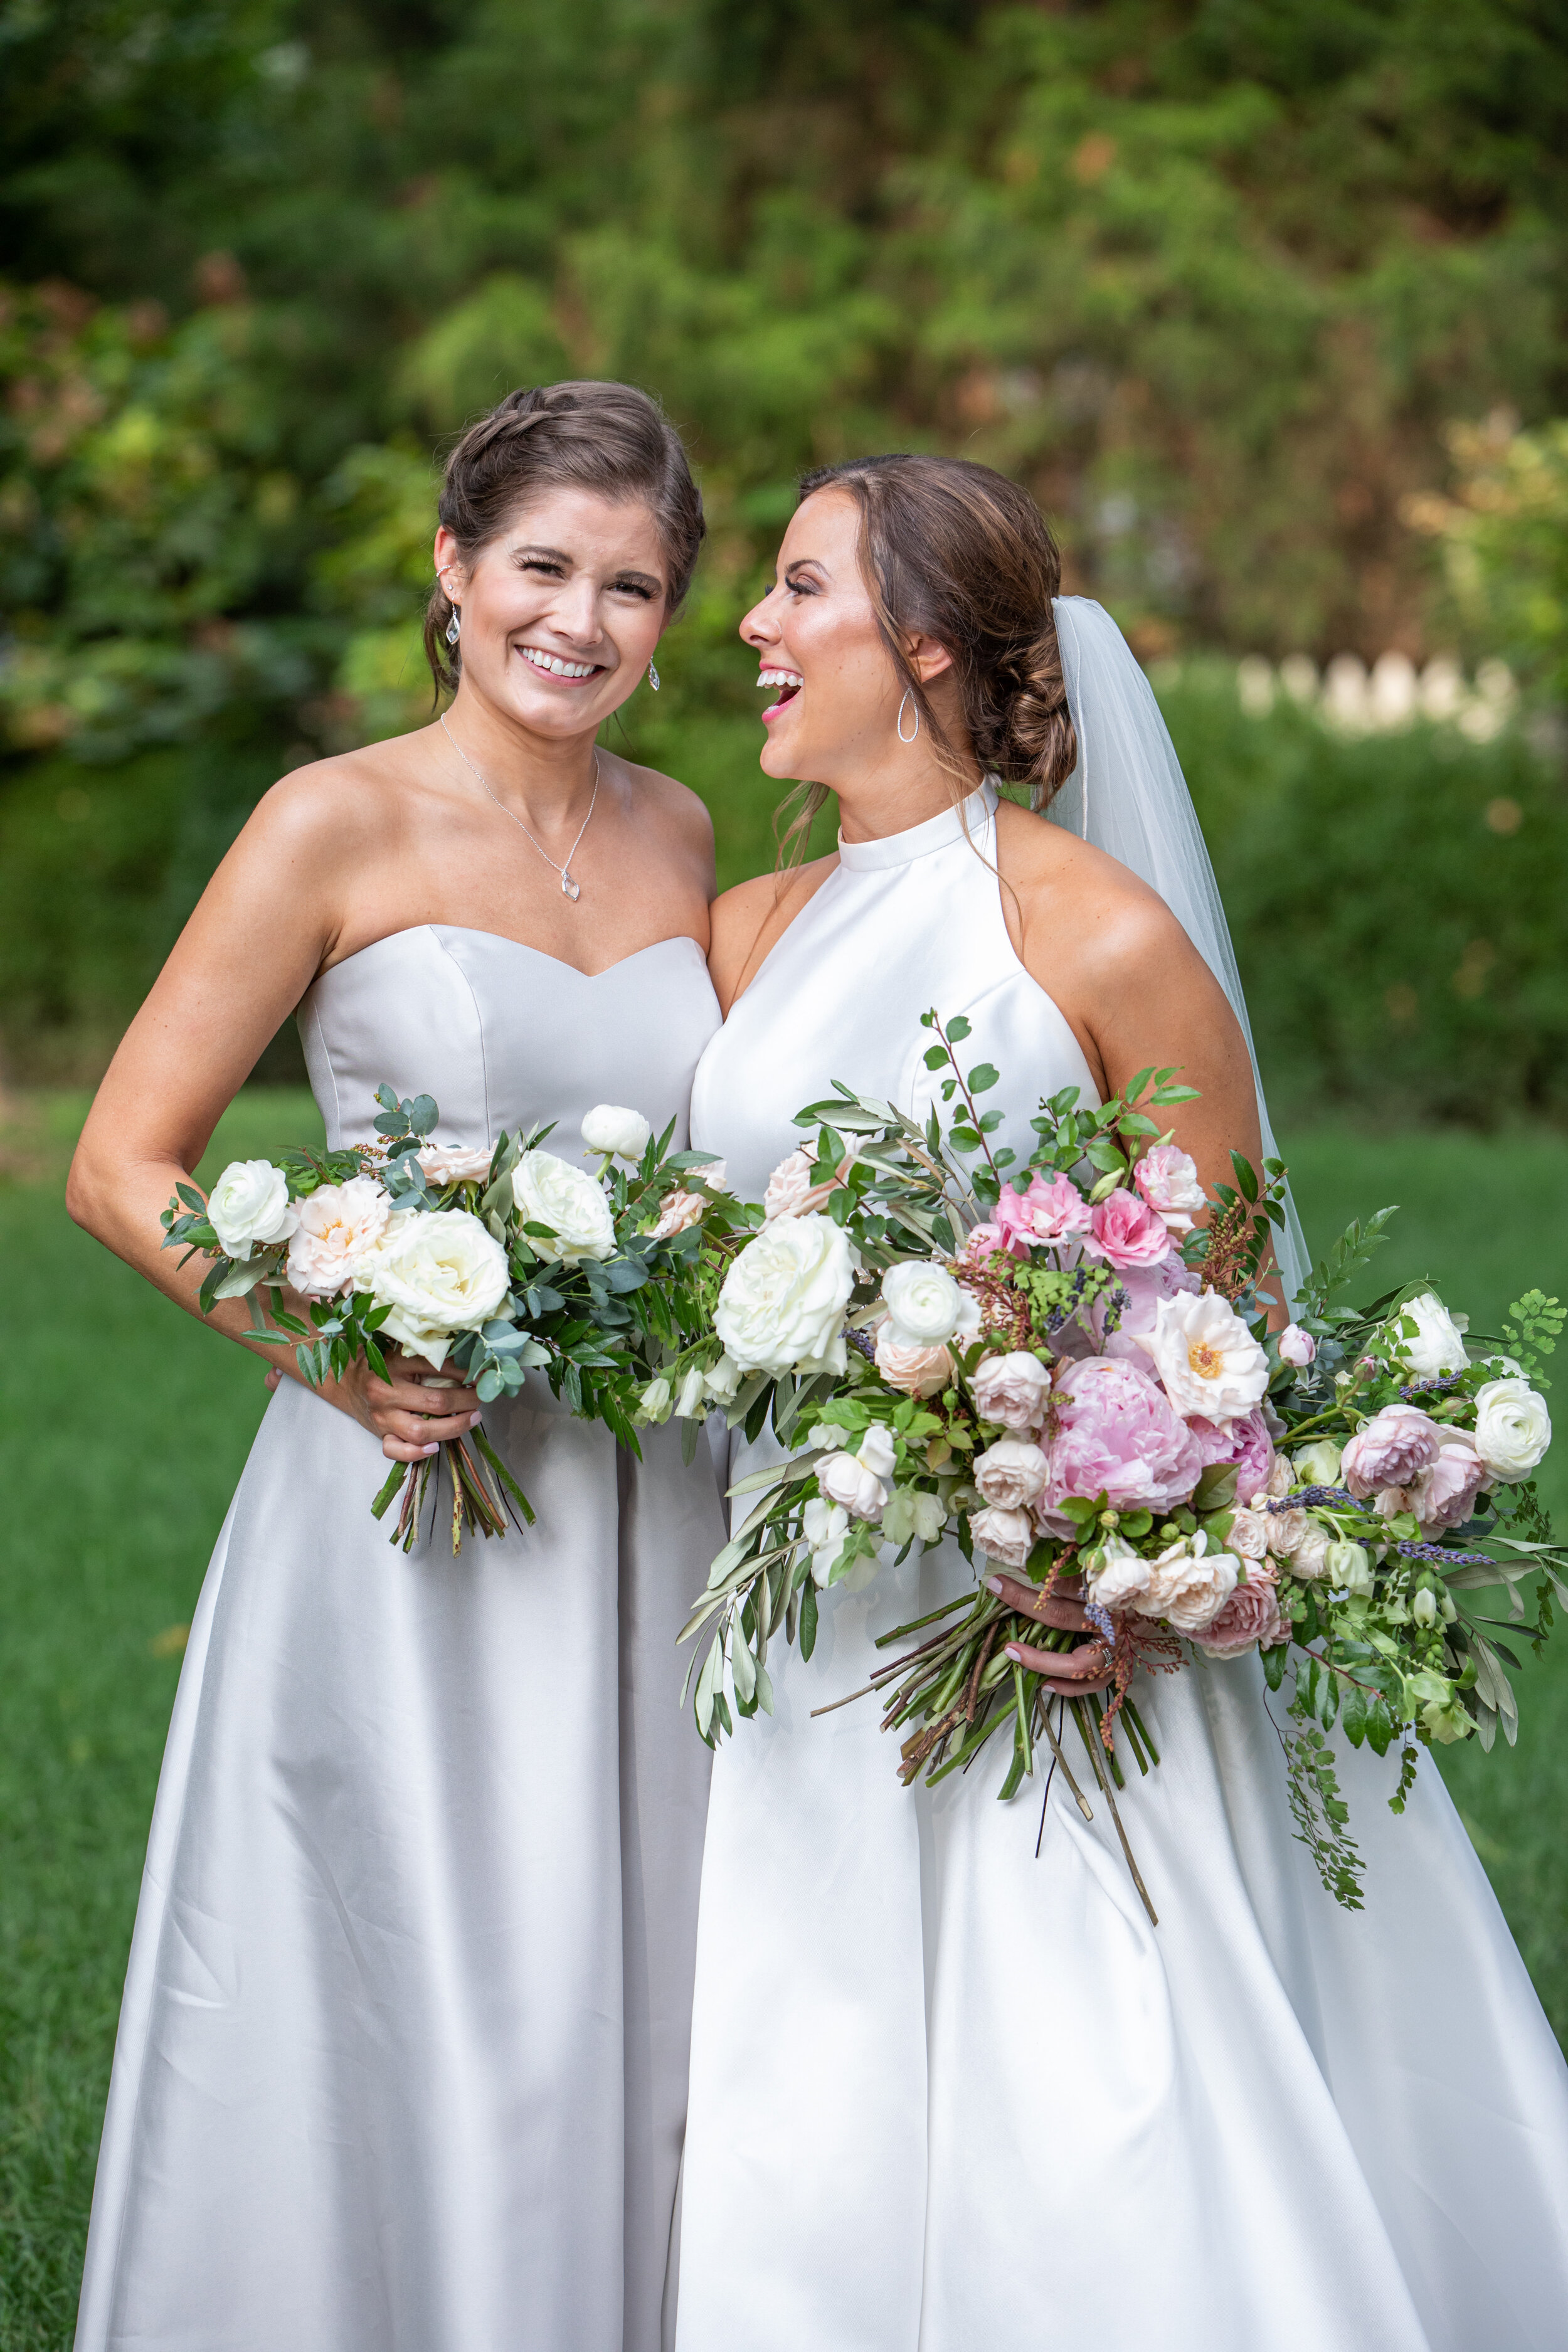 Silk bridesmaid gown with garden-inspired flowers, using peonies, ranunculus, garden roses, and ferns in shades of soft pink, blush, white, and ivory. Nashville wedding floral design.